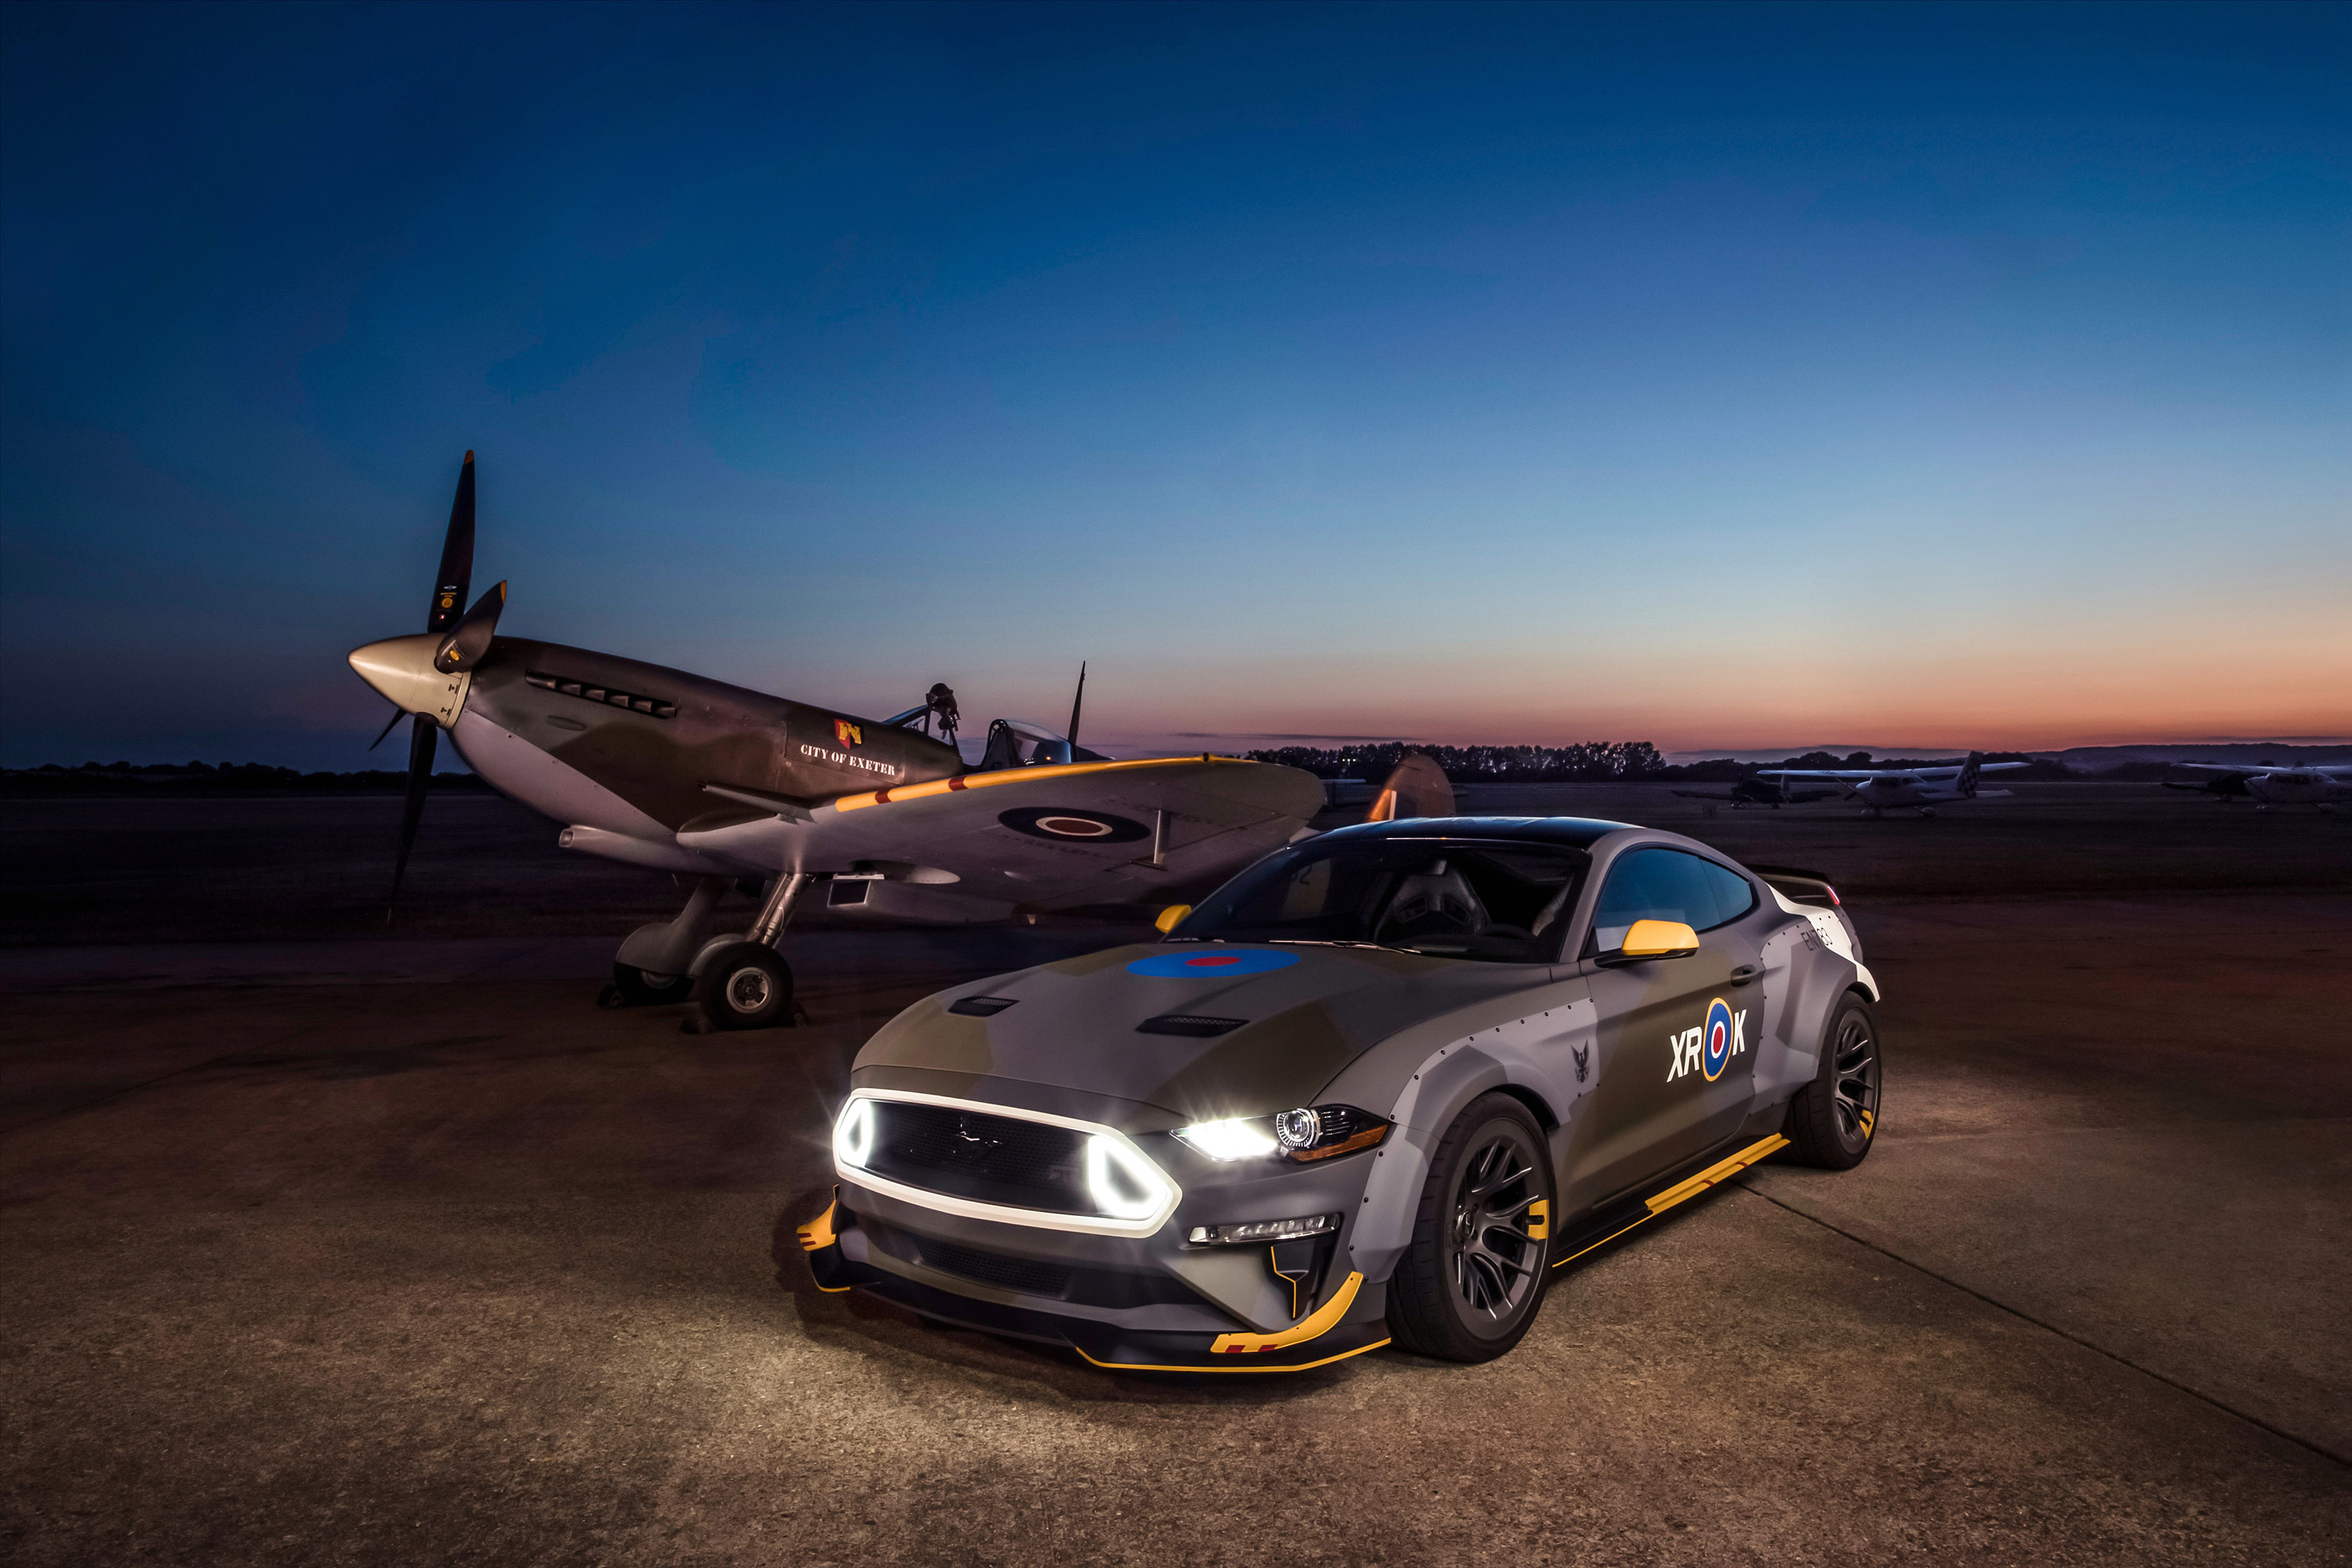  2018 Ford Eagle Squadron Mustang GT Wallpaper.